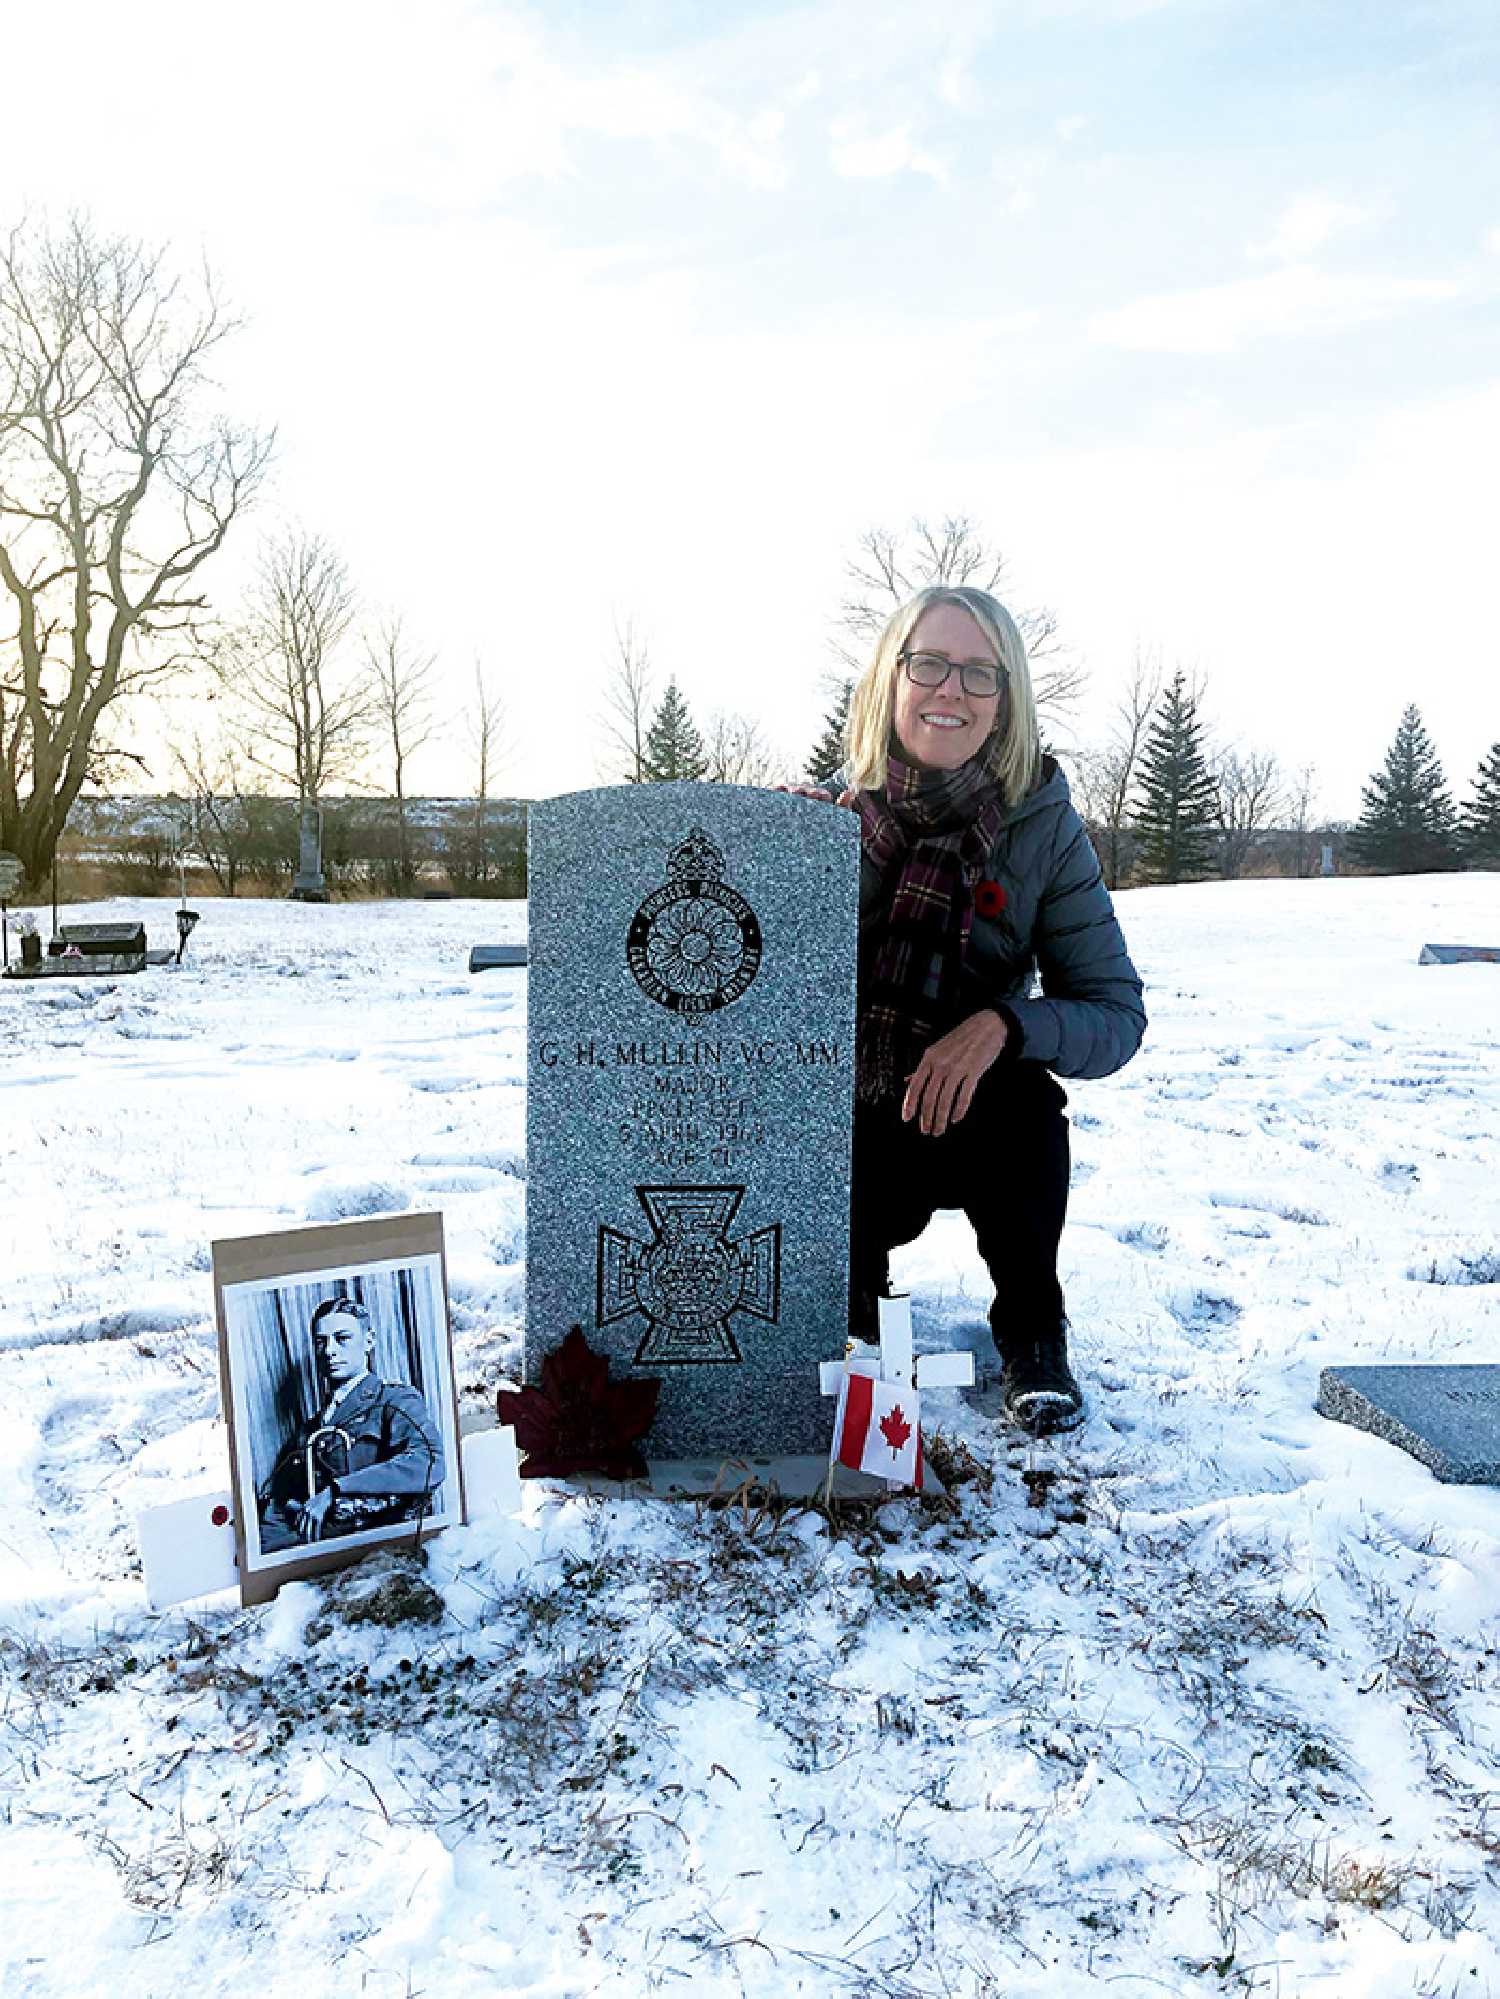 Pictured above is Susan Fisher, great-granddaughter of Harry Mullin by marriage, at Harry’s gravesite in Moosomin on Remembrance Day 2022.